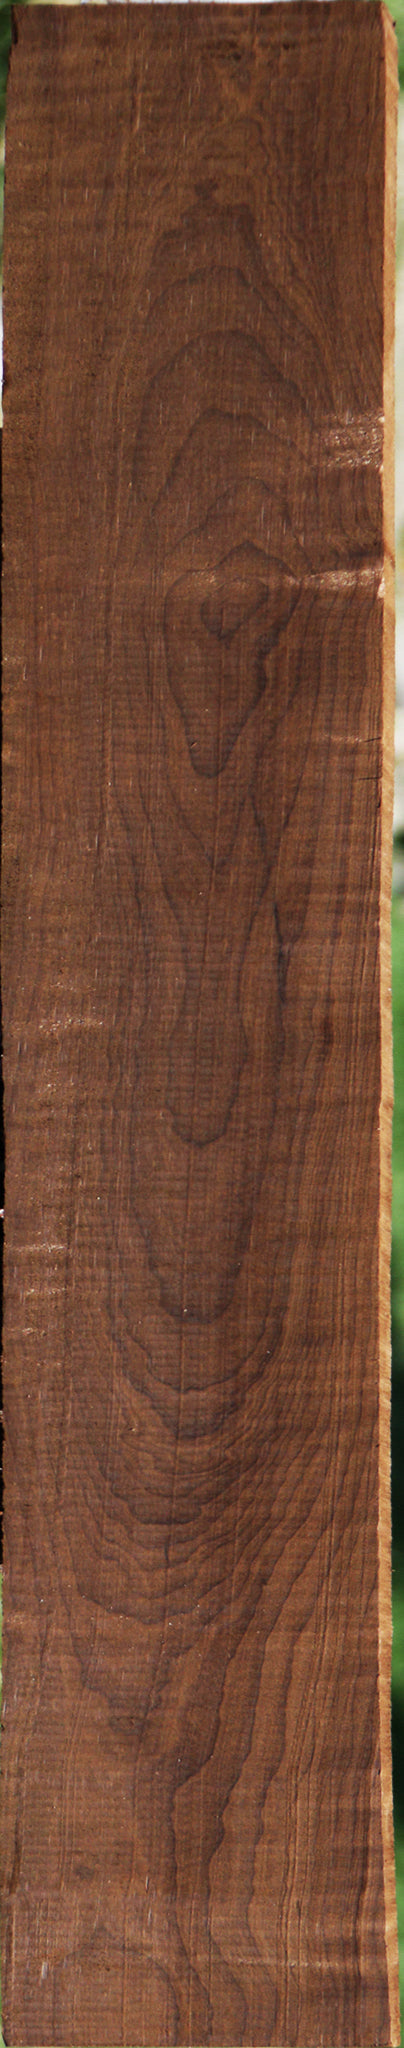 Extra Fancy Curly Caramelized Maple Lumber